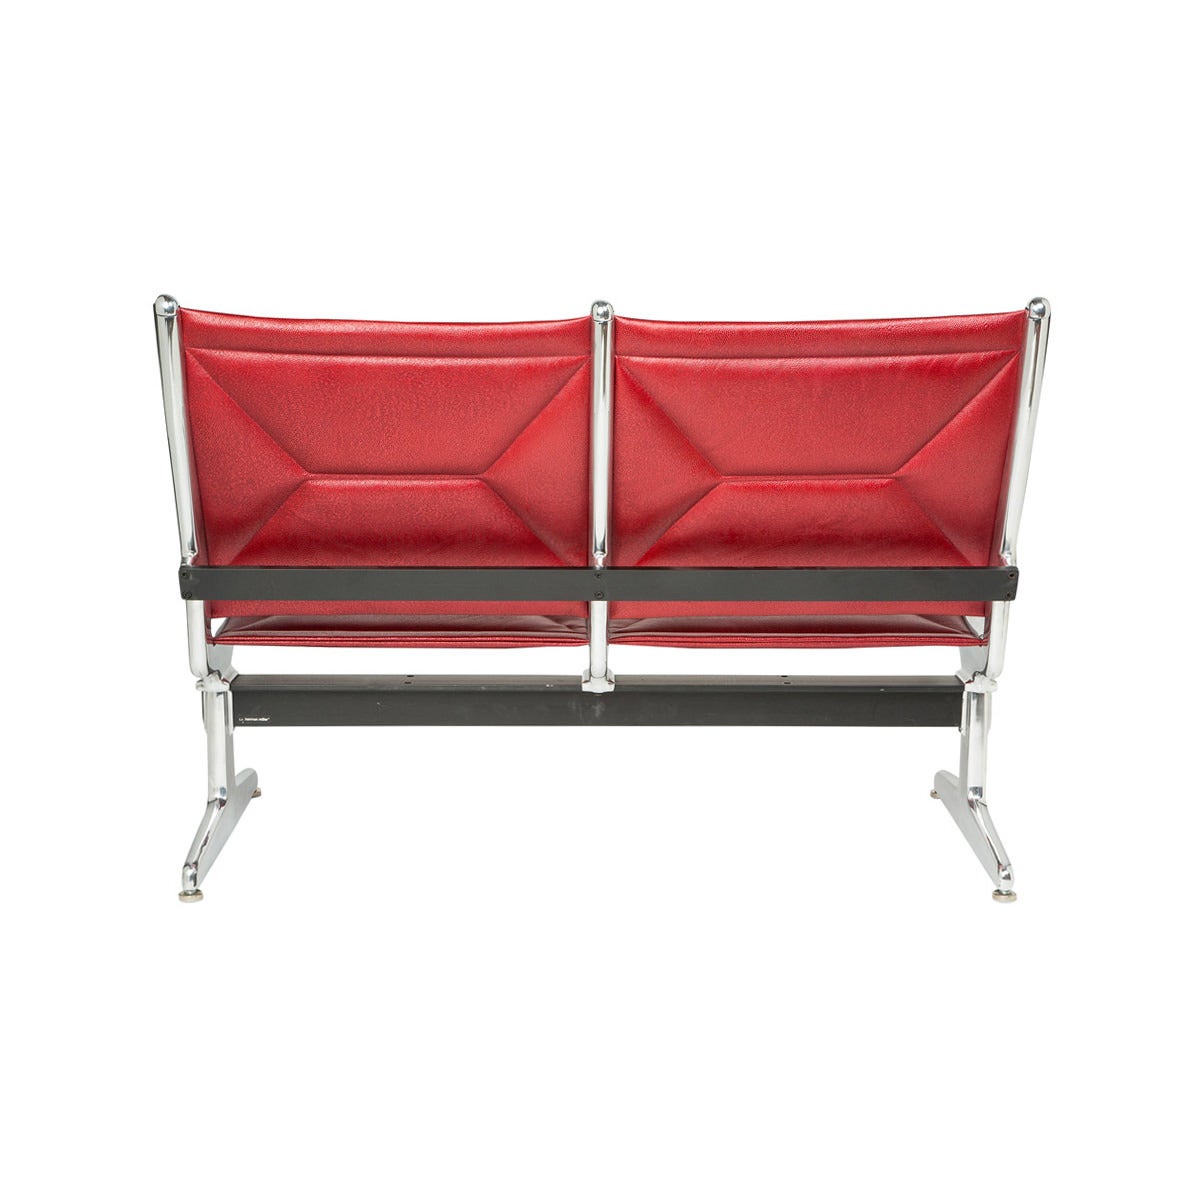 Mid-20th Century Custom Restored Tandem Sling by Eames for Herman Miller, Red Edelman Leather